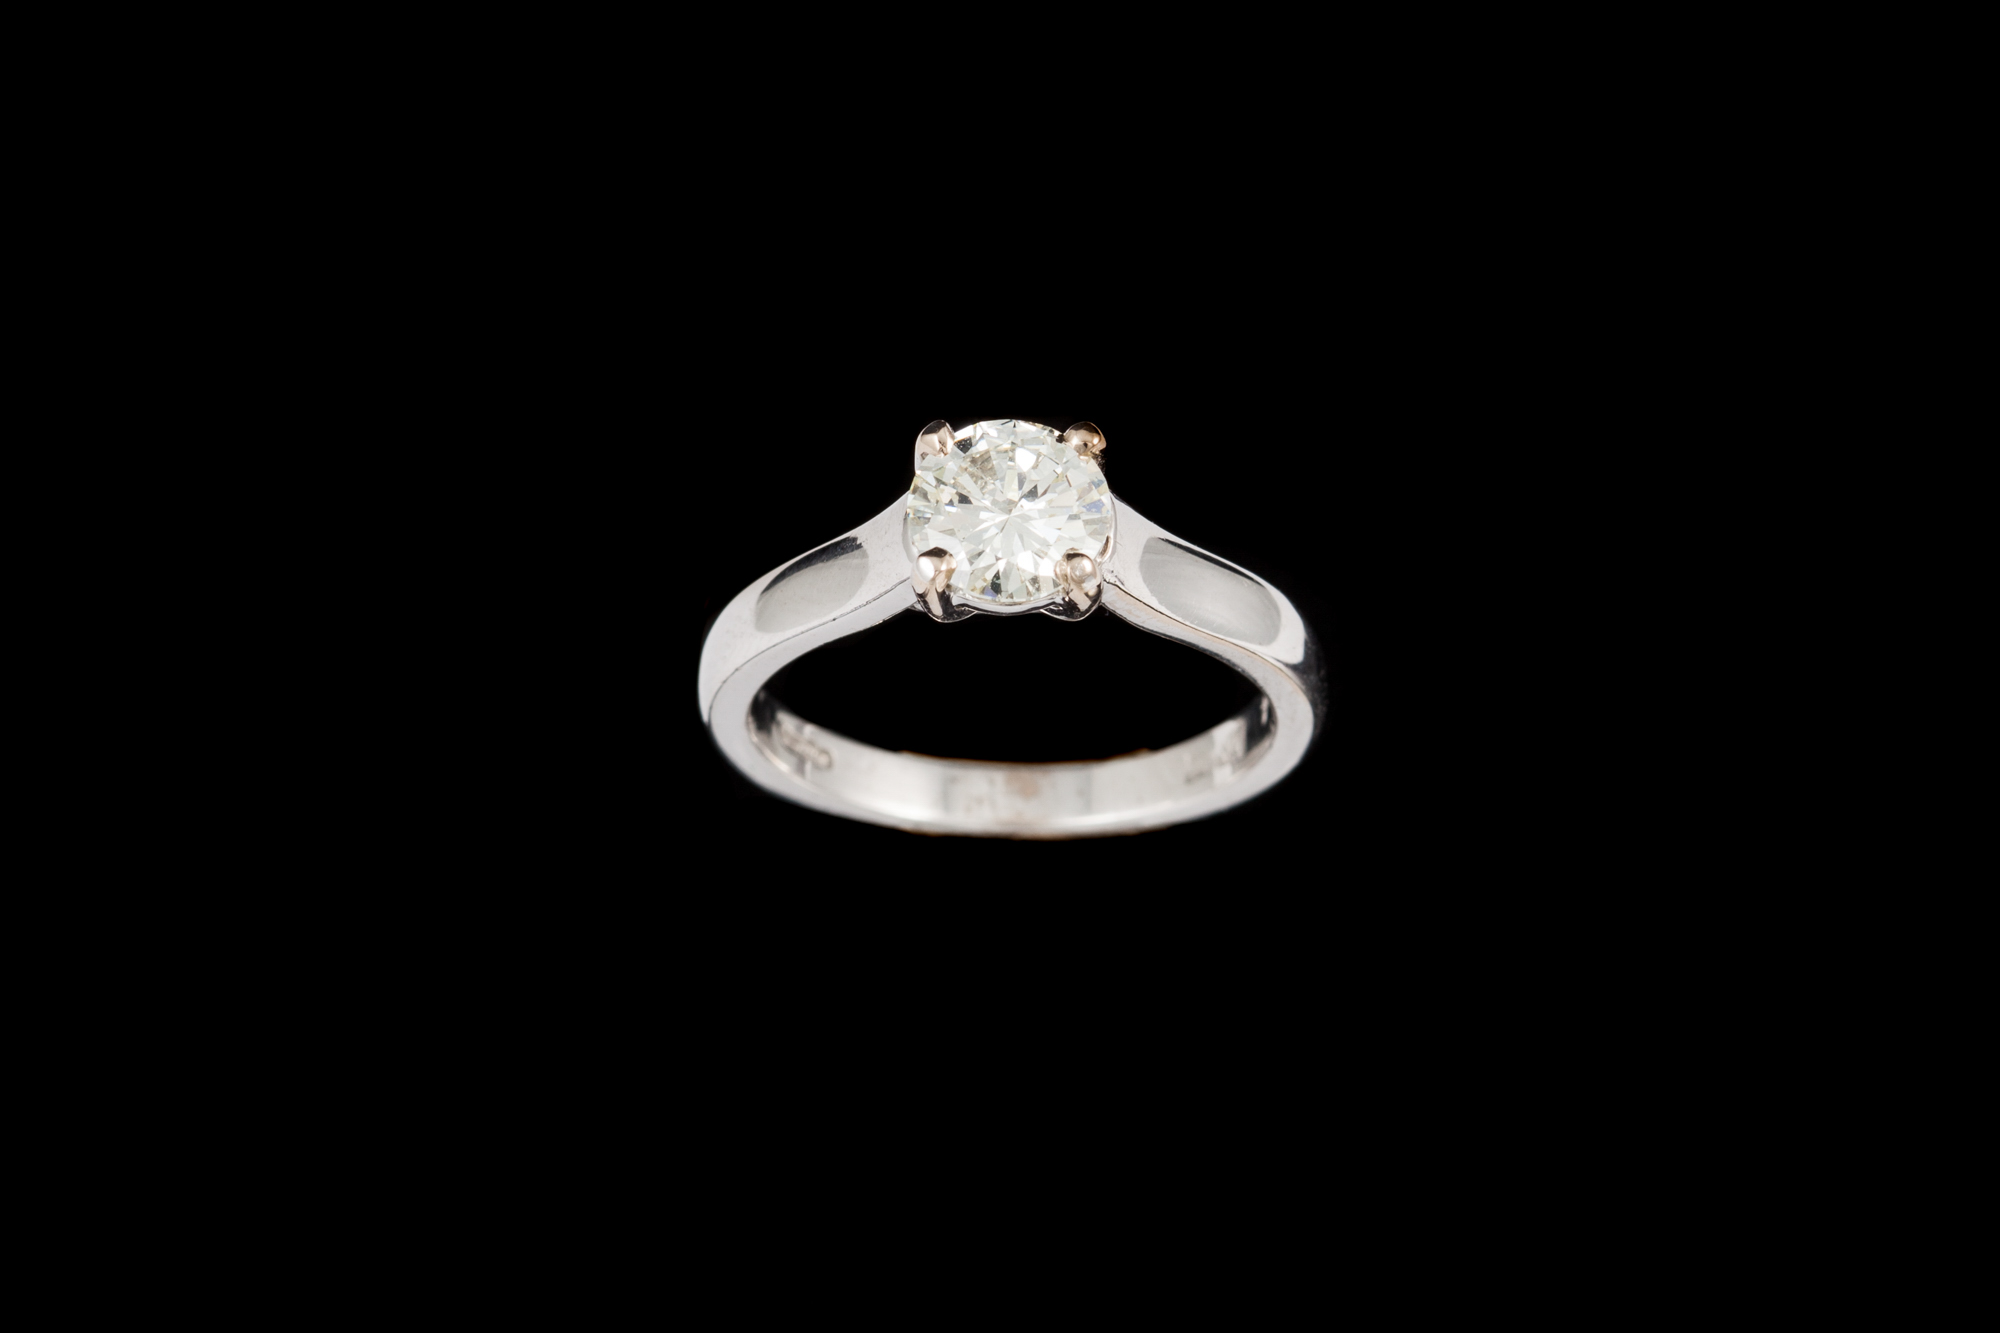 A DIAMOND SOLITAIRE RING, of approx. 1.00ct L/M SI, mounted in 18ct white gold